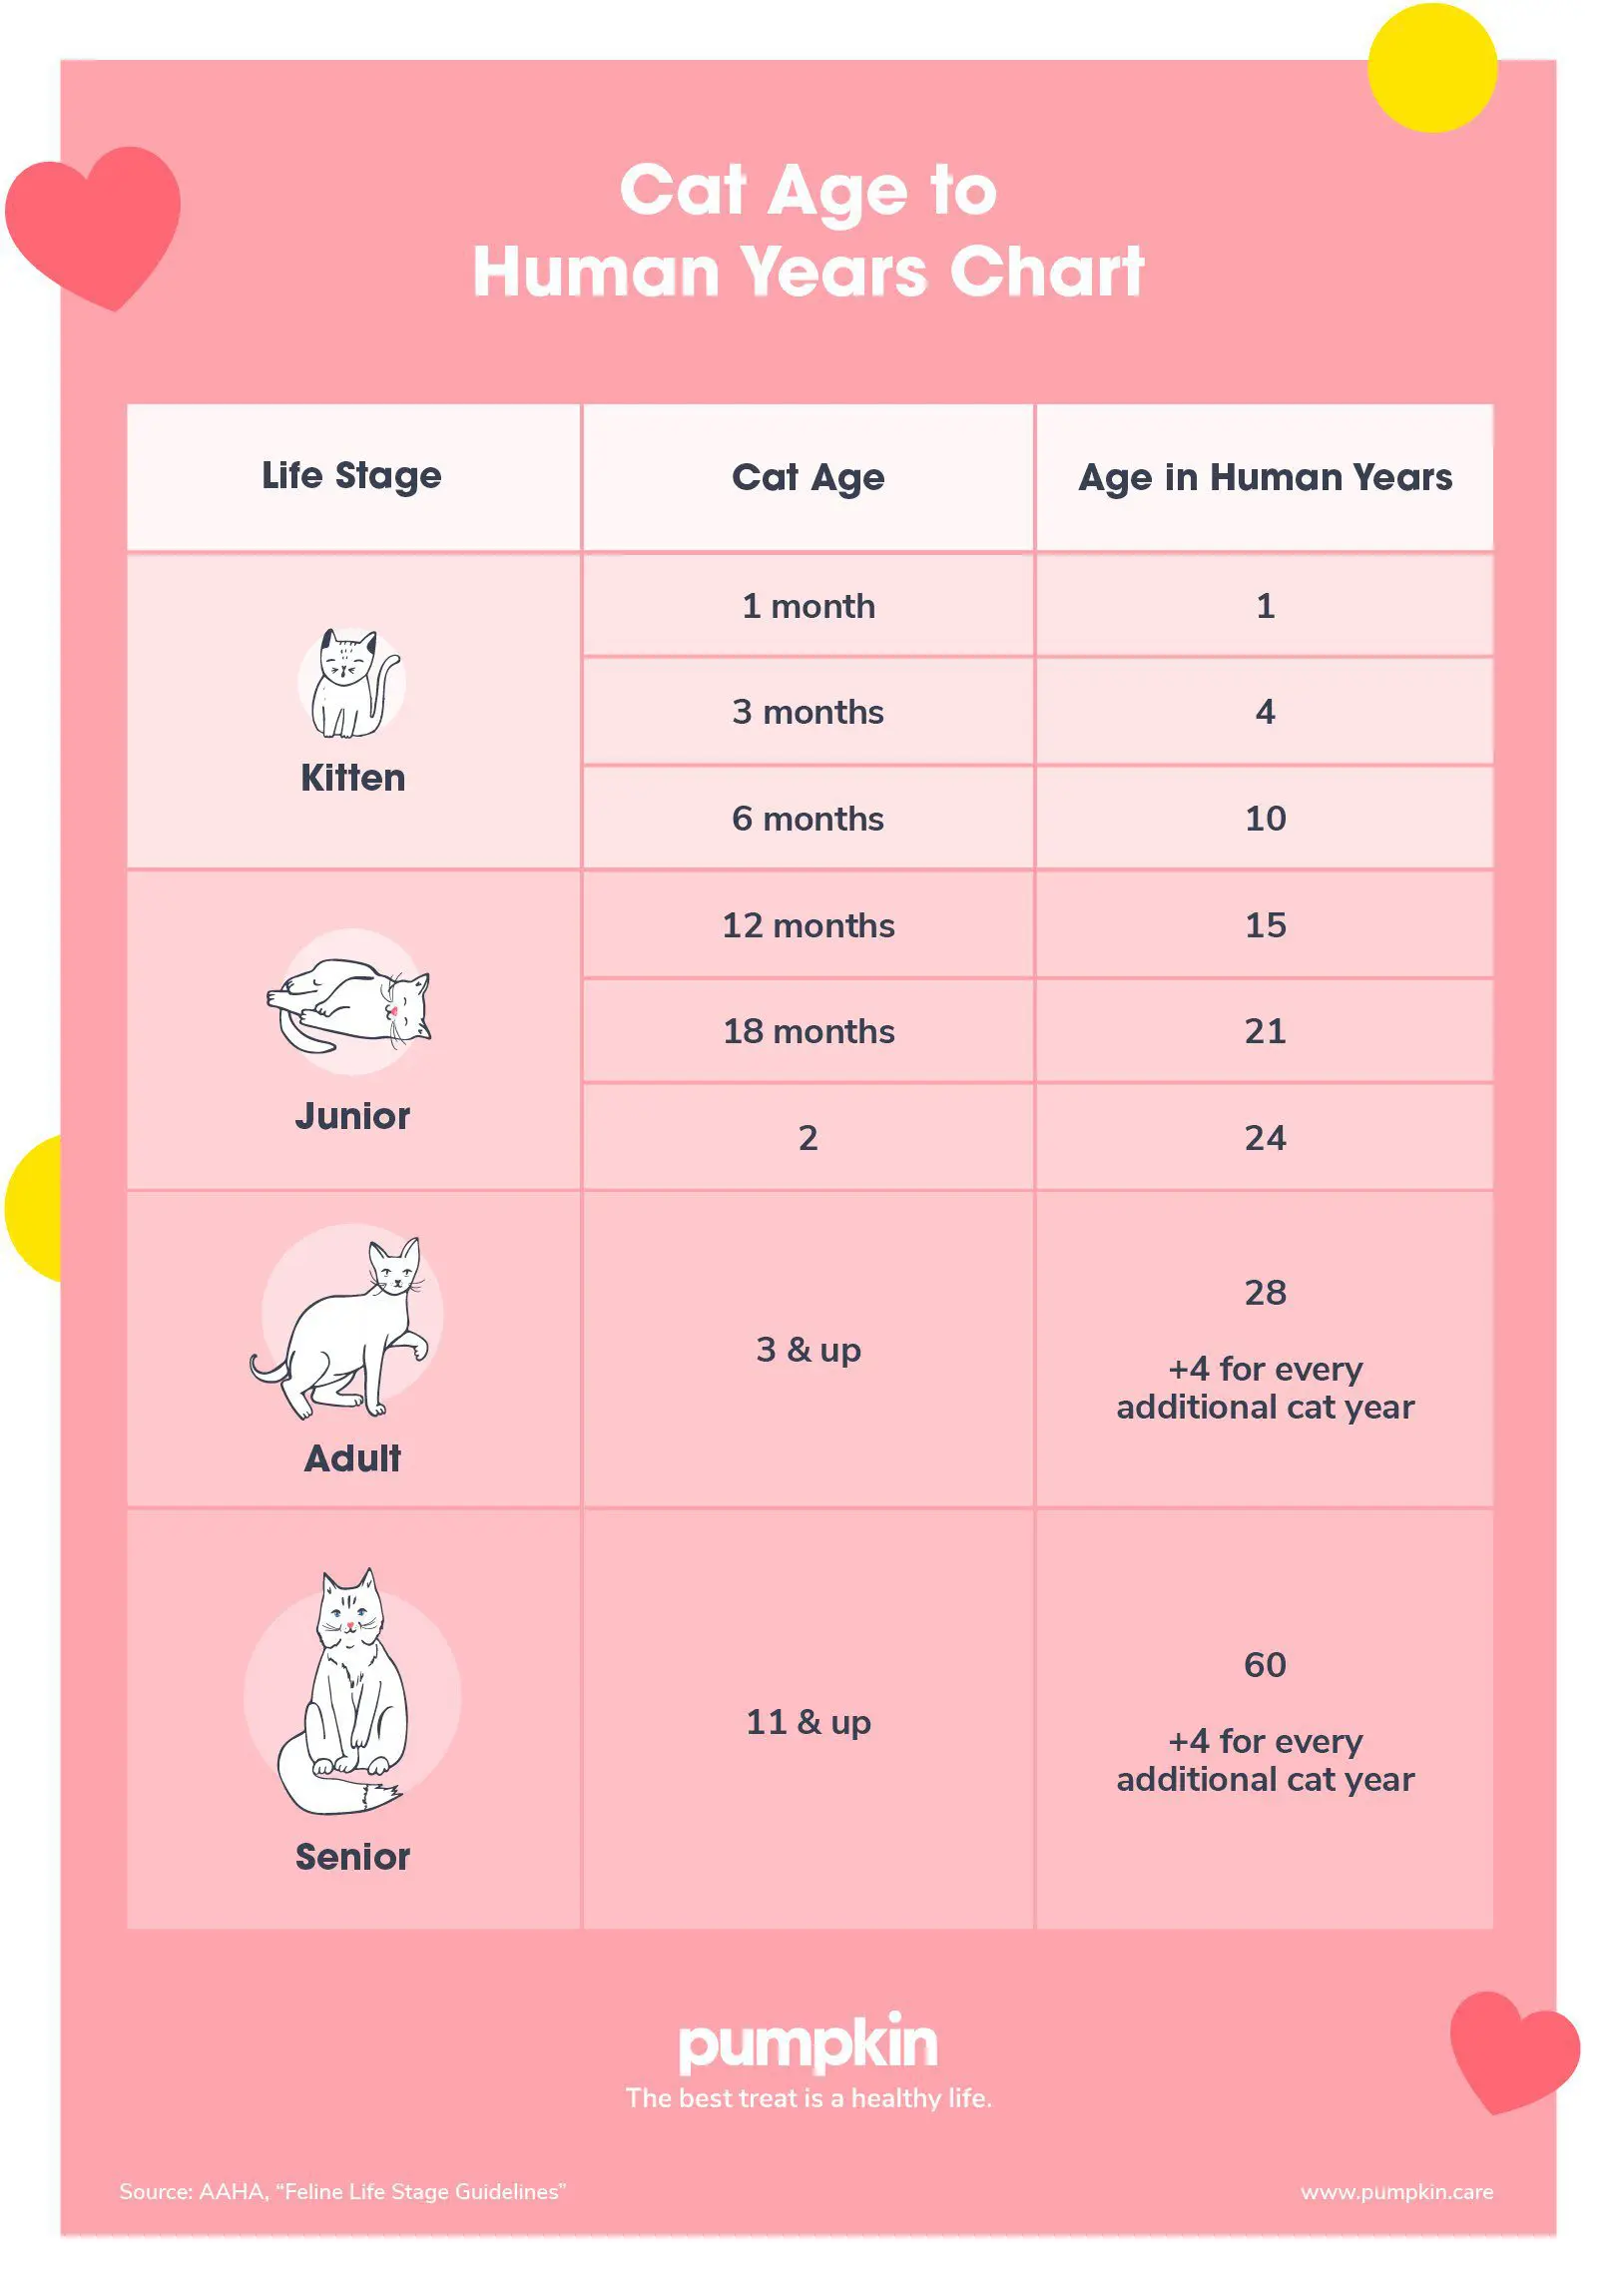 cat-years-to-human-years-conversion_cat-age-chart